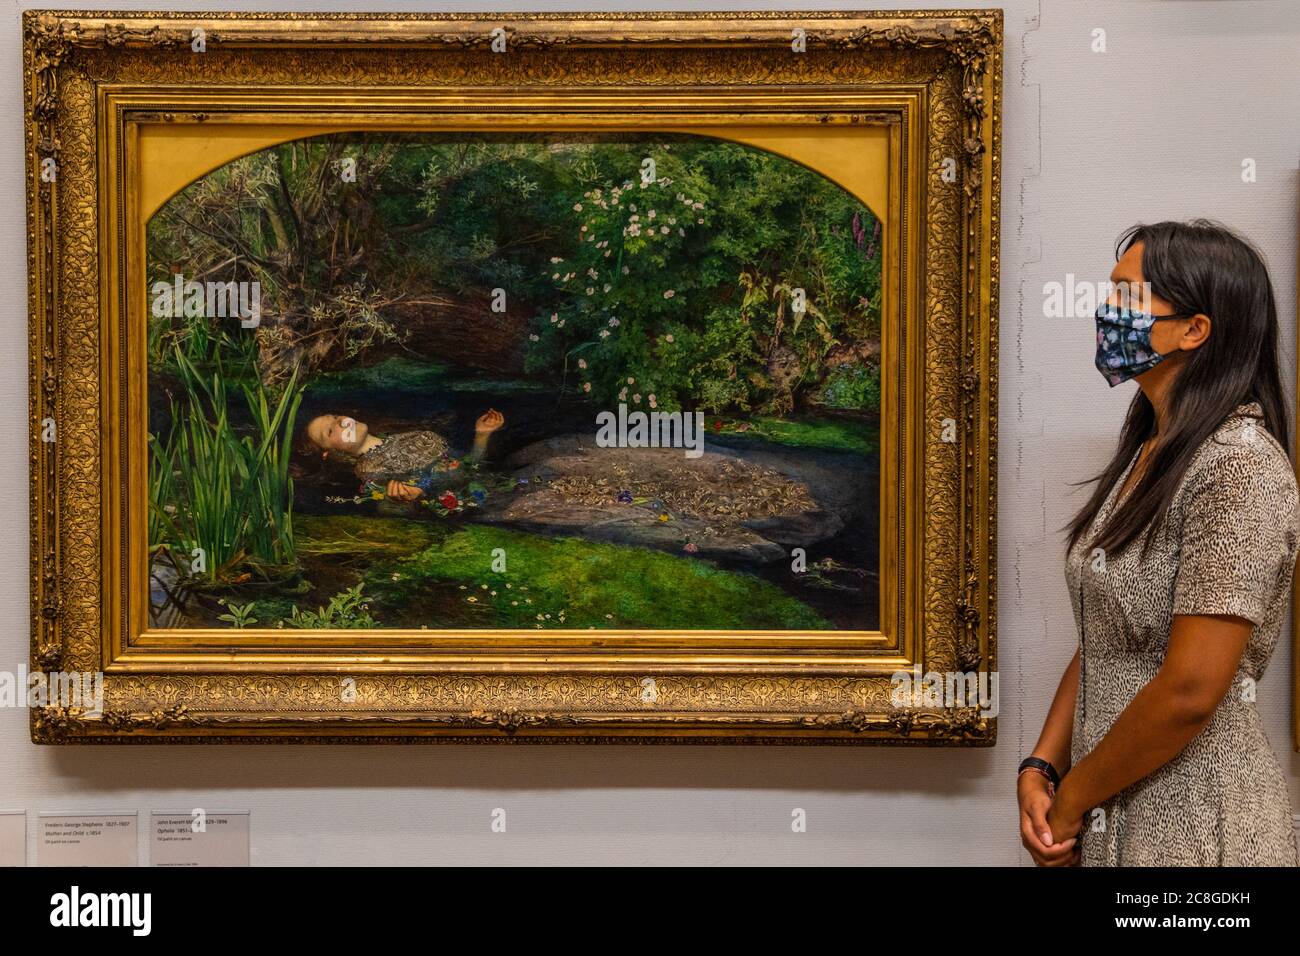 London, UK. 24th July, 2020. Ophelia by Millais - Works in the 1840's gallery - The Tate Britain re-opens on Monday. Visitors are asked to follow guidance on social distancing etc, in line with advice from government following the easing of the lockdown. Credit: Guy Bell/Alamy Live News Stock Photo